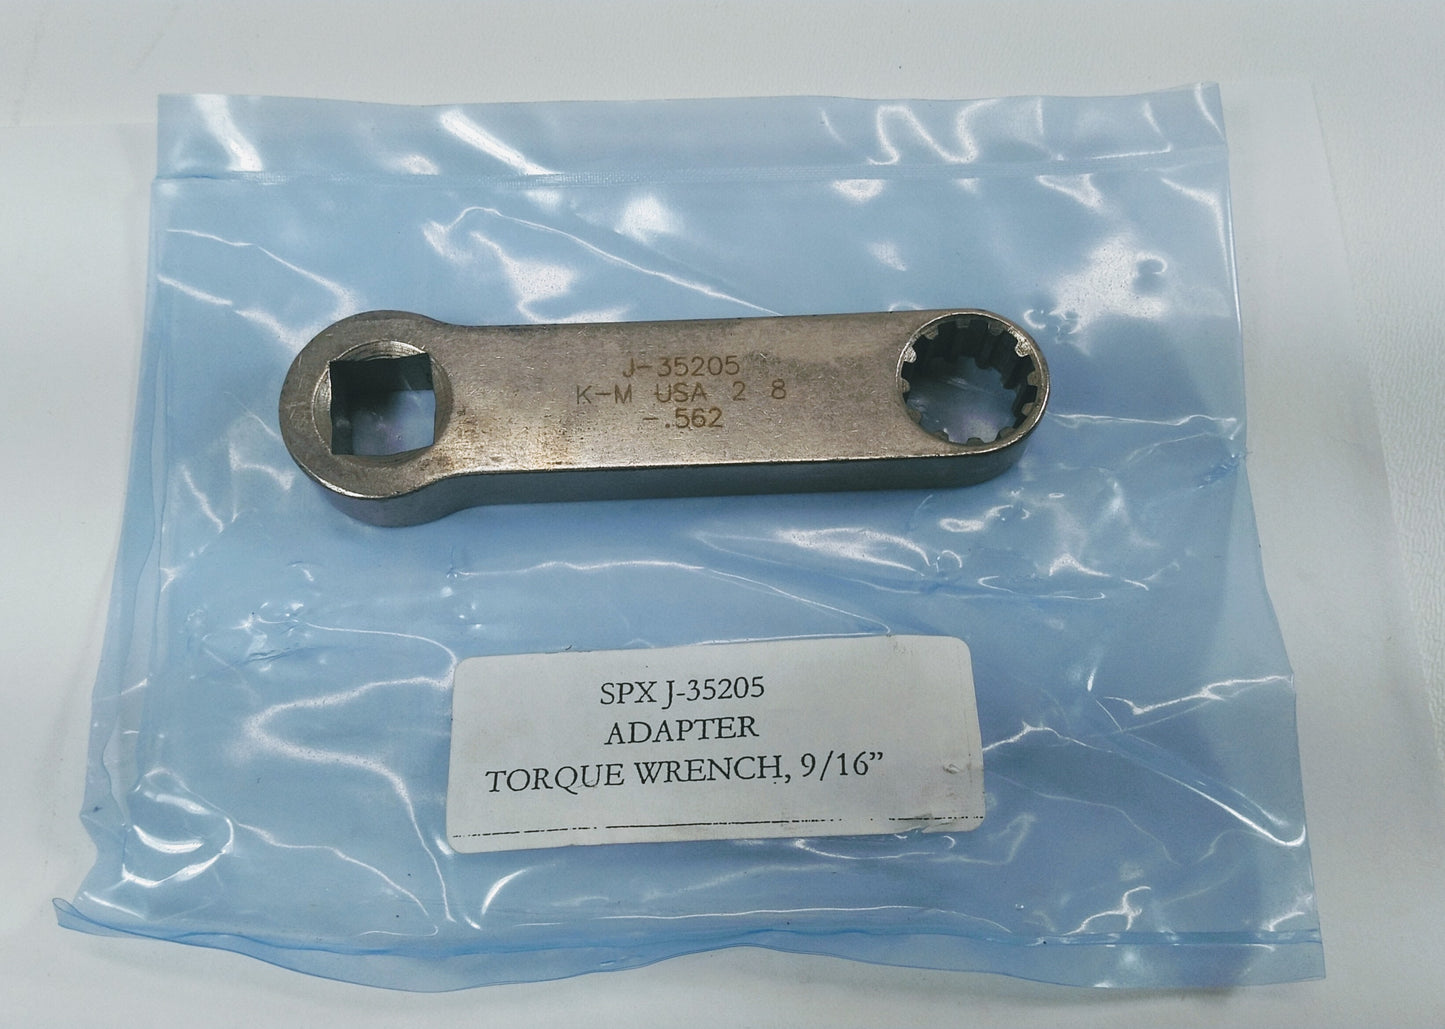 TORQUE WRENCH ADAPTER (9/16")  5120-01-173-6253 J-35205